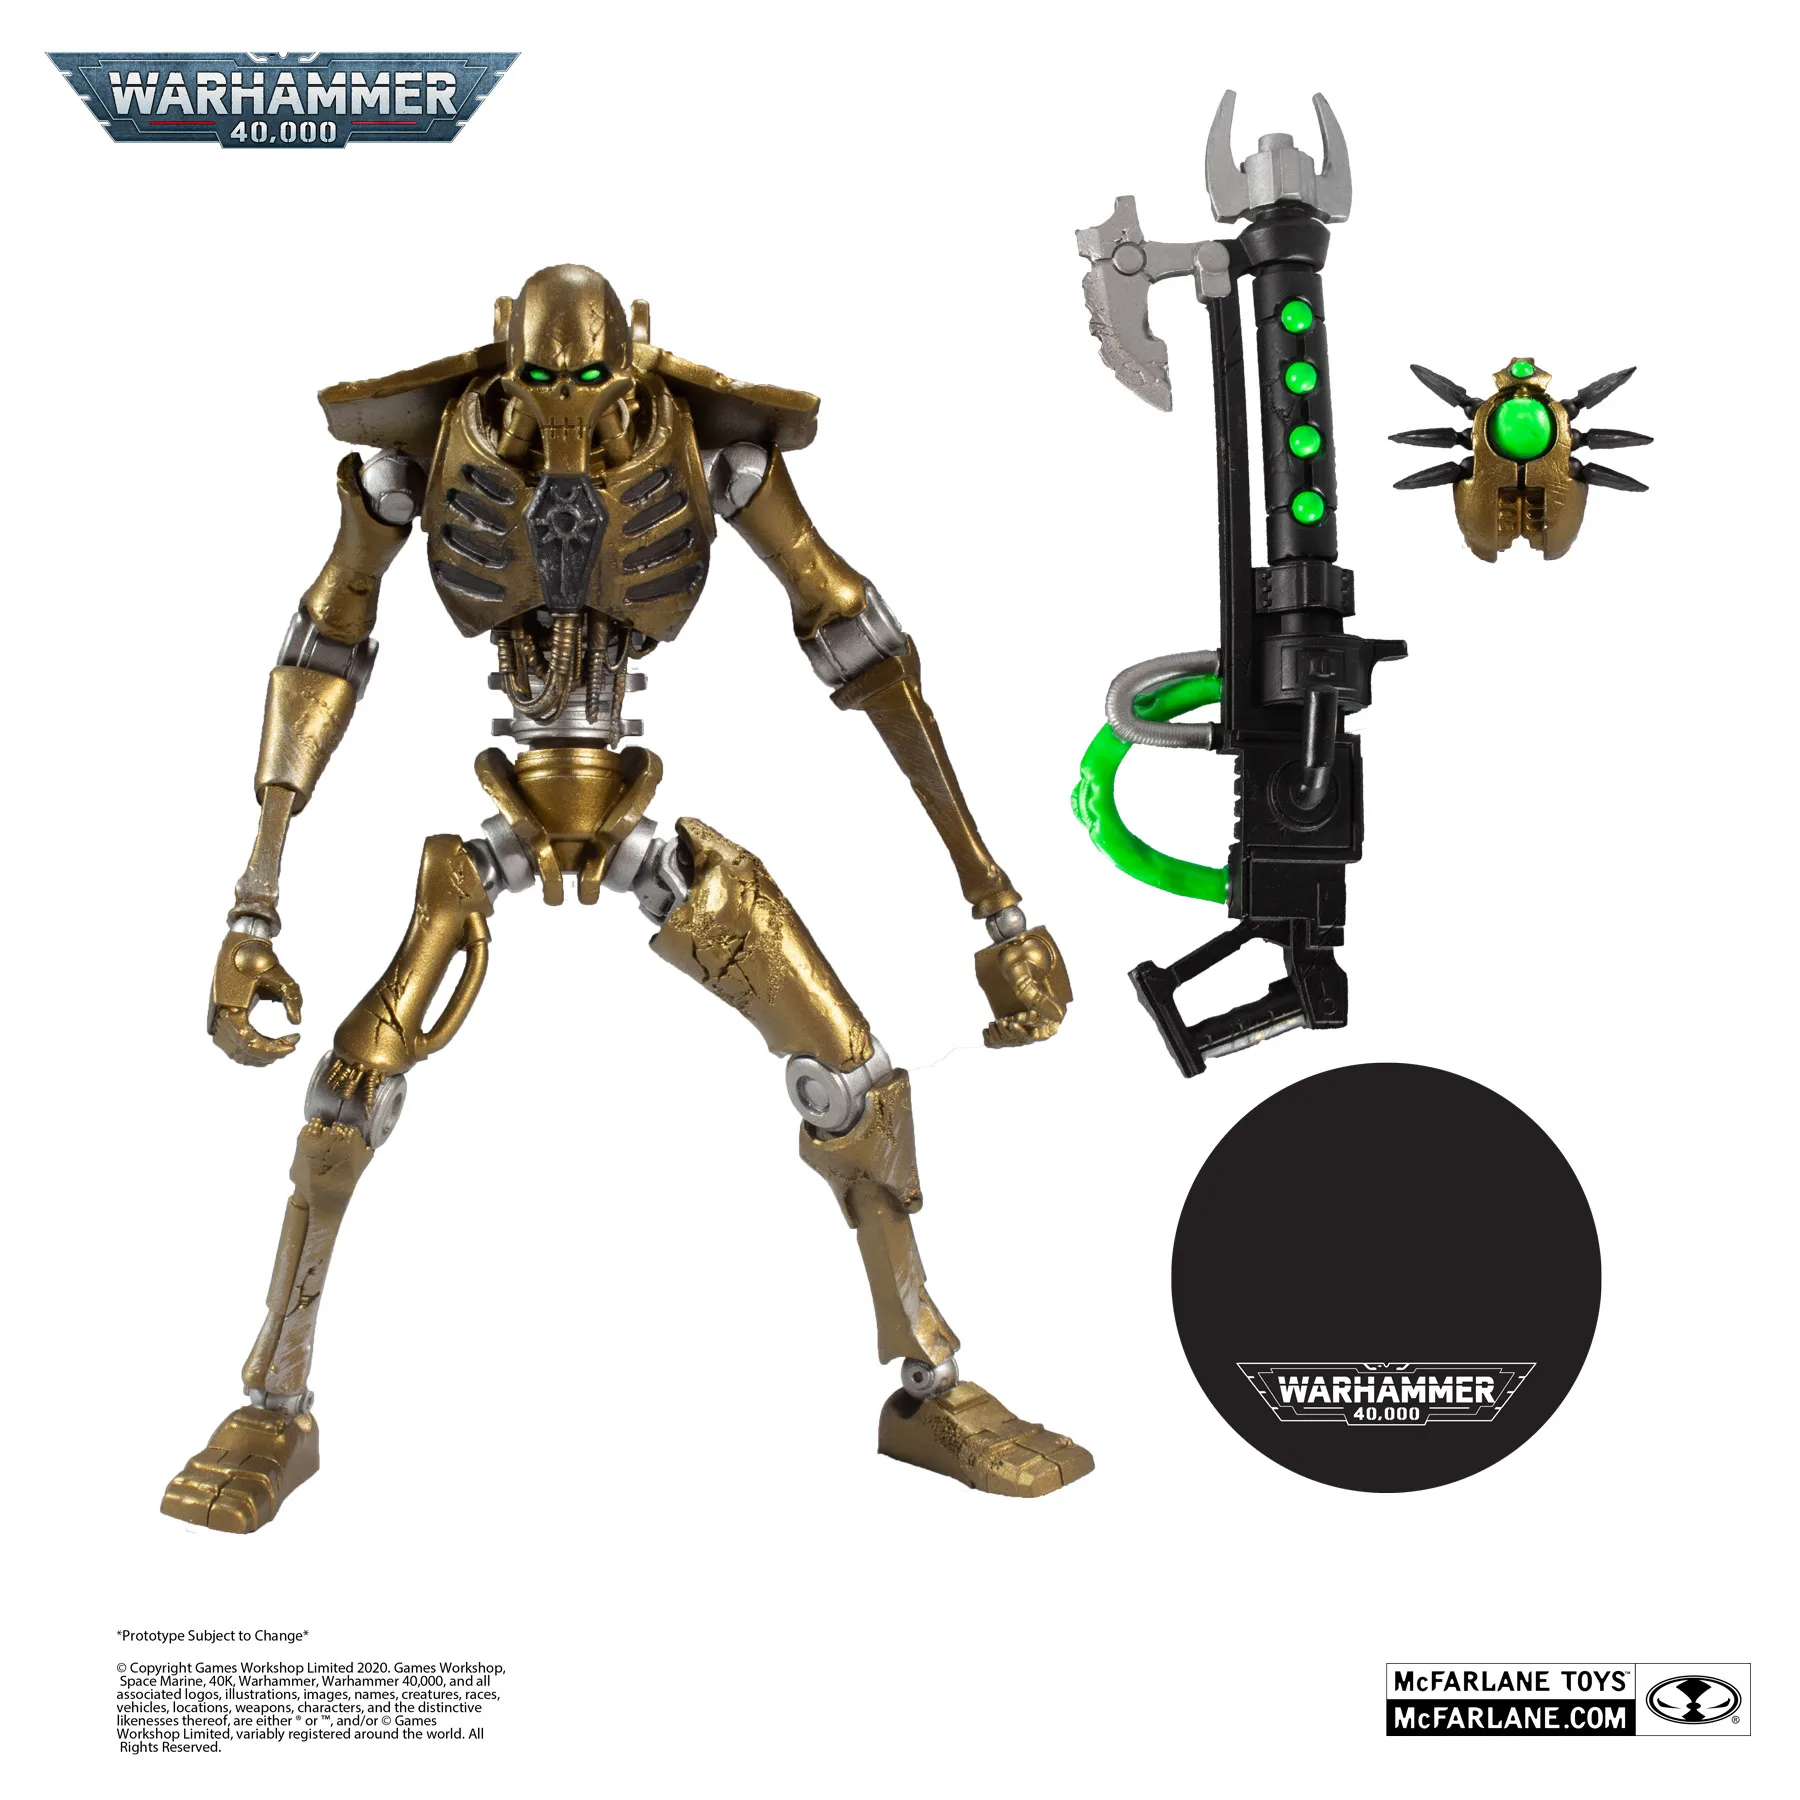 

Mcfarlane 1/10 Warhammer 40K Necrons Action Figure Free Shipping Hobby Collect Birthday Present Model Toys Anime Stok Gift